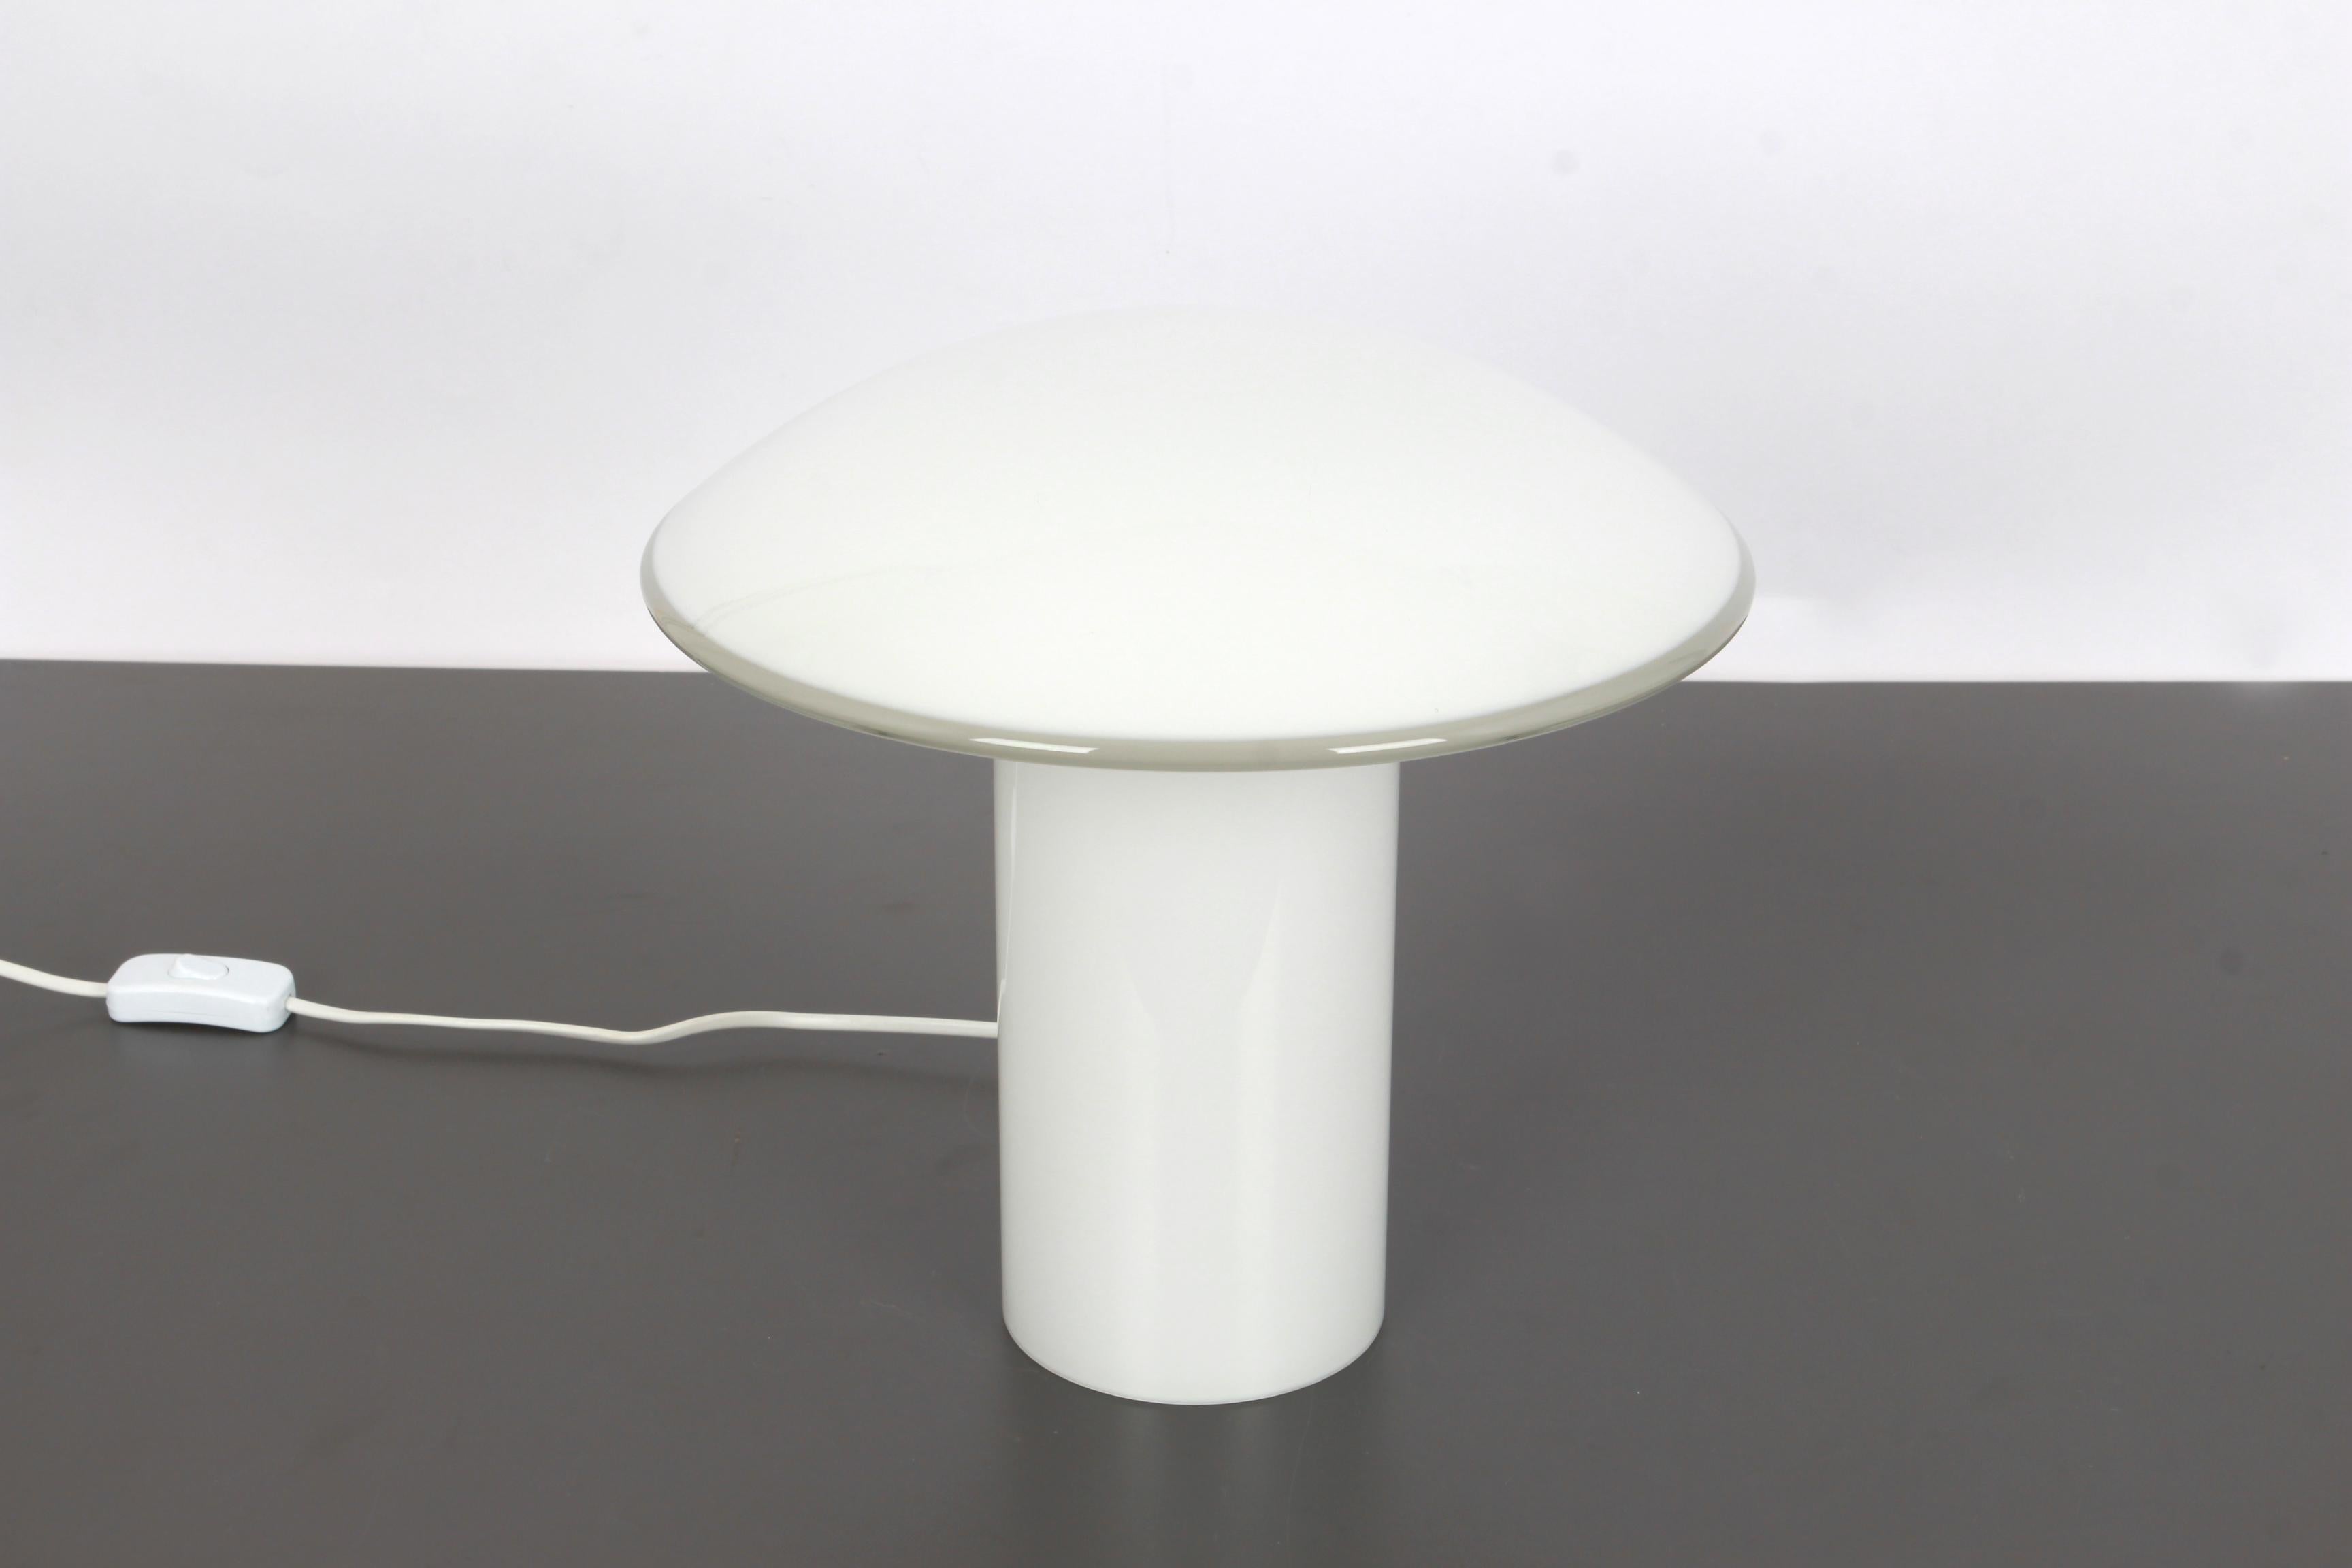 Wonderful mushroom table lamp by Peill & Putzler, Germany, 1970s. Made of a single piece.
Great glass body and its edgy quality contrast nicely with the smooth surface and shape of the mushroom. 

Large table lamp:
Height 30 cm //11.8